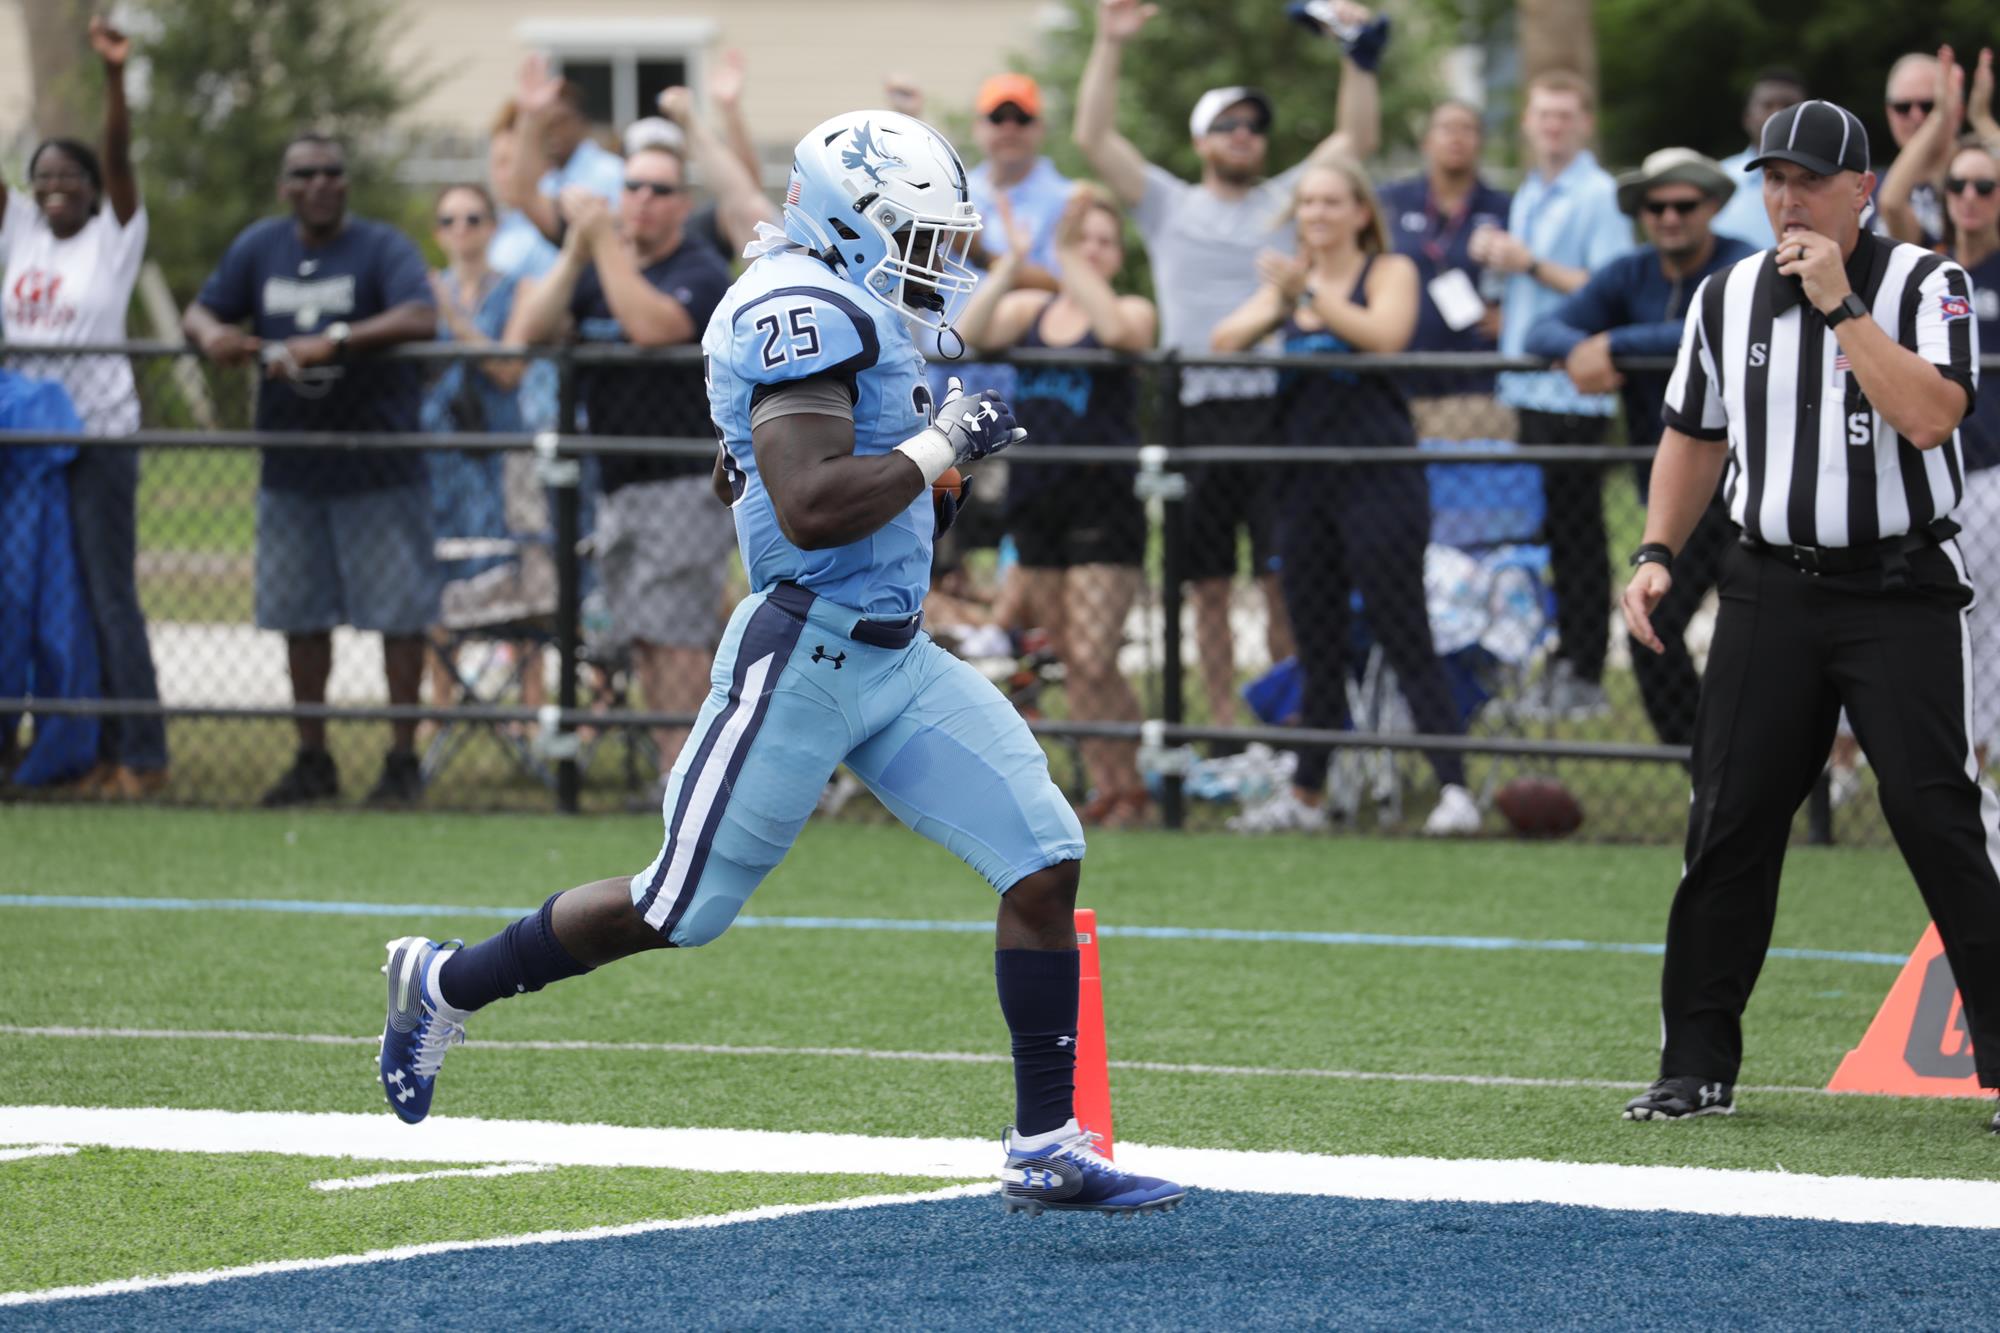 Keiser's offense has junior running back Marques Burgess who has 1,558 rushing yards and 18 touchdowns.